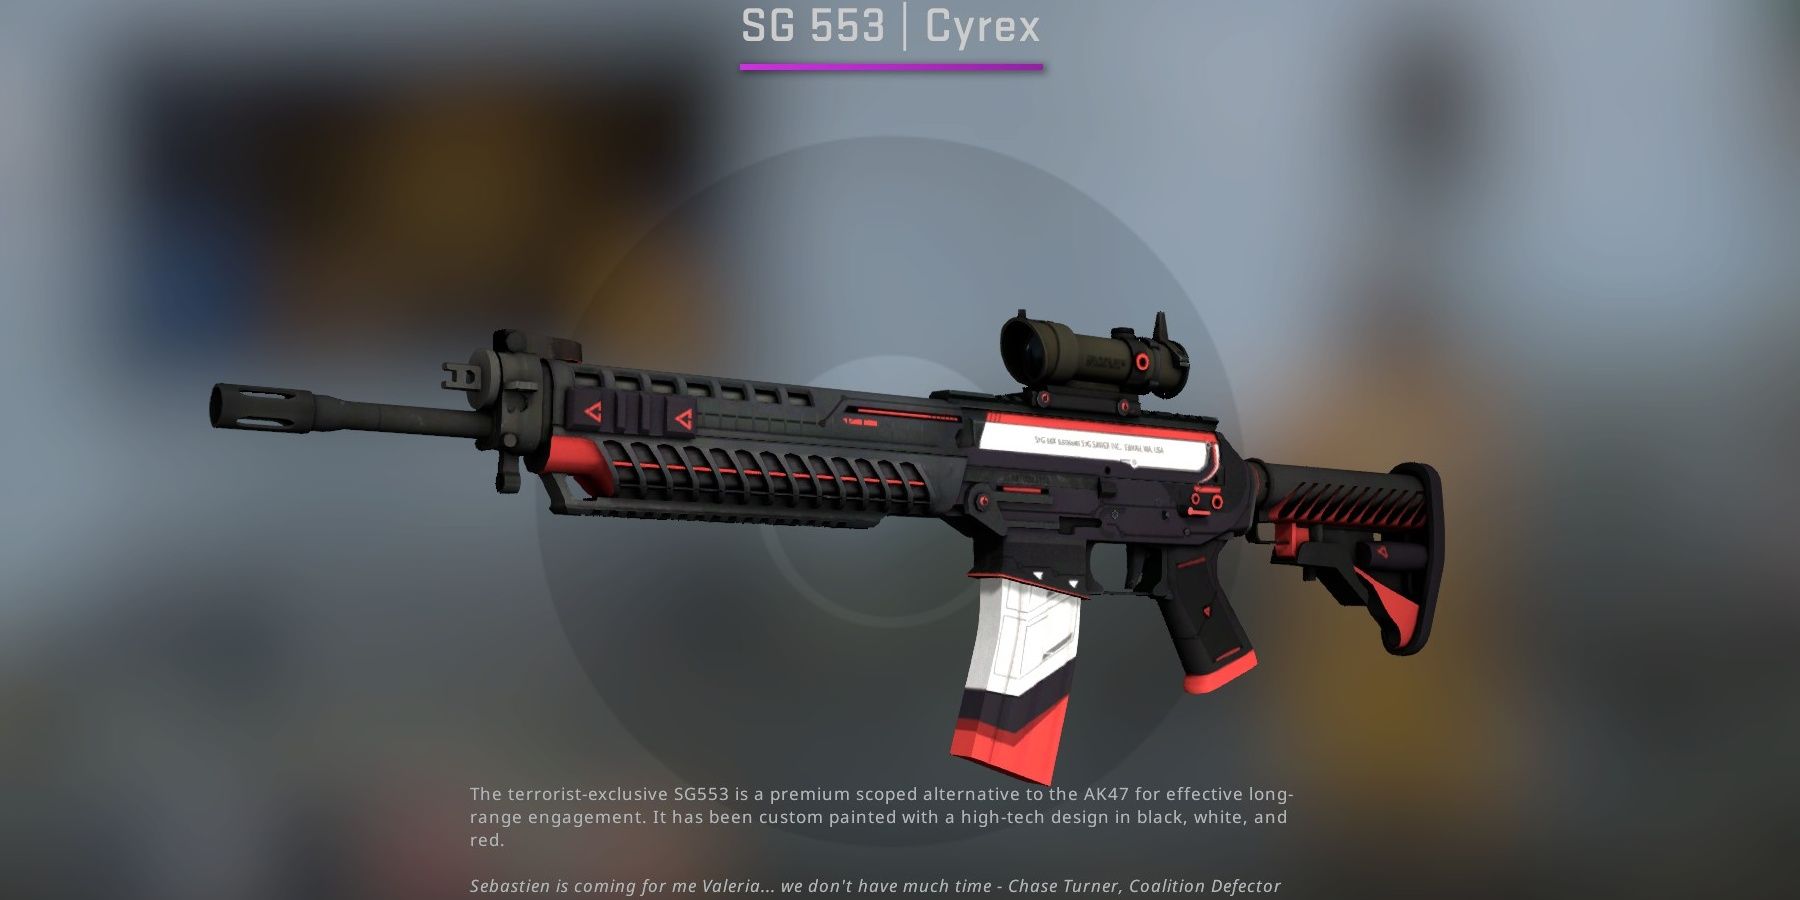 The SG 553 in Counter-Strike: Global Offensive